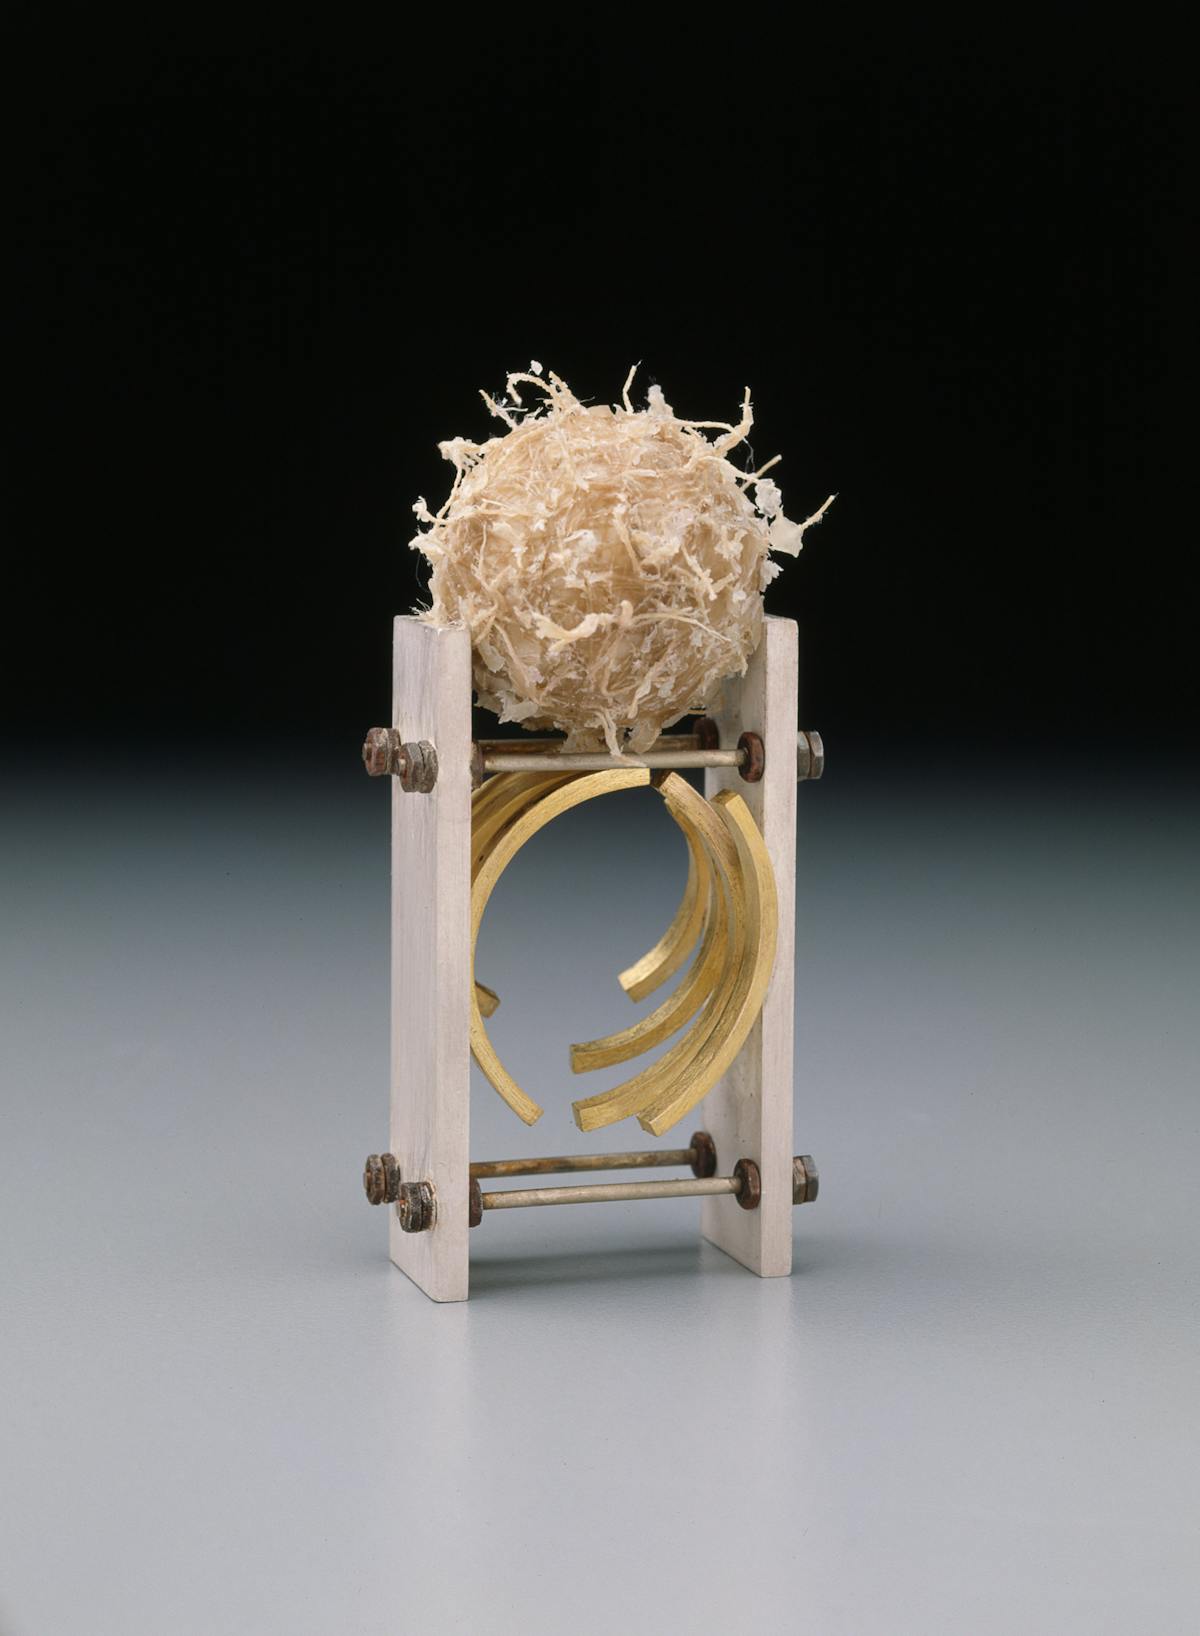 art jewelry ring with vise like structure and ornamental textured ball of wax